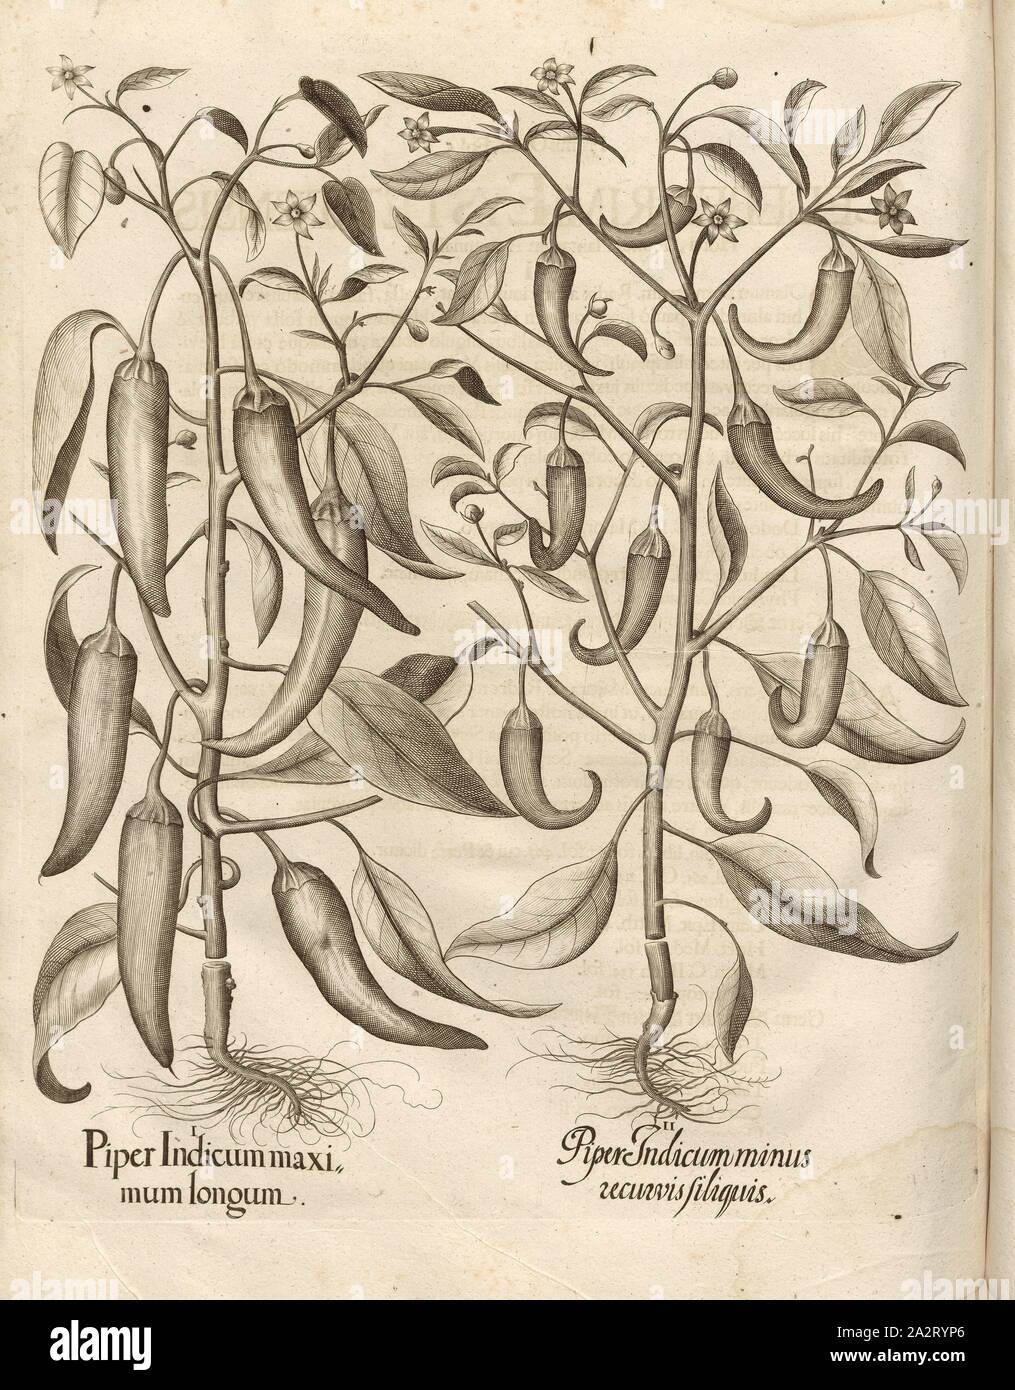 Chiefly by the Indian long pepper, Piper Indicum less recurved filiquis, Pepper, Copper Engraving, p. 726, Besler, Basilius; Jungermann, Ludwig, 1713, Basilius Besler: Hortus Eystettensis (...). Nürnberg, 1713 Stock Photo